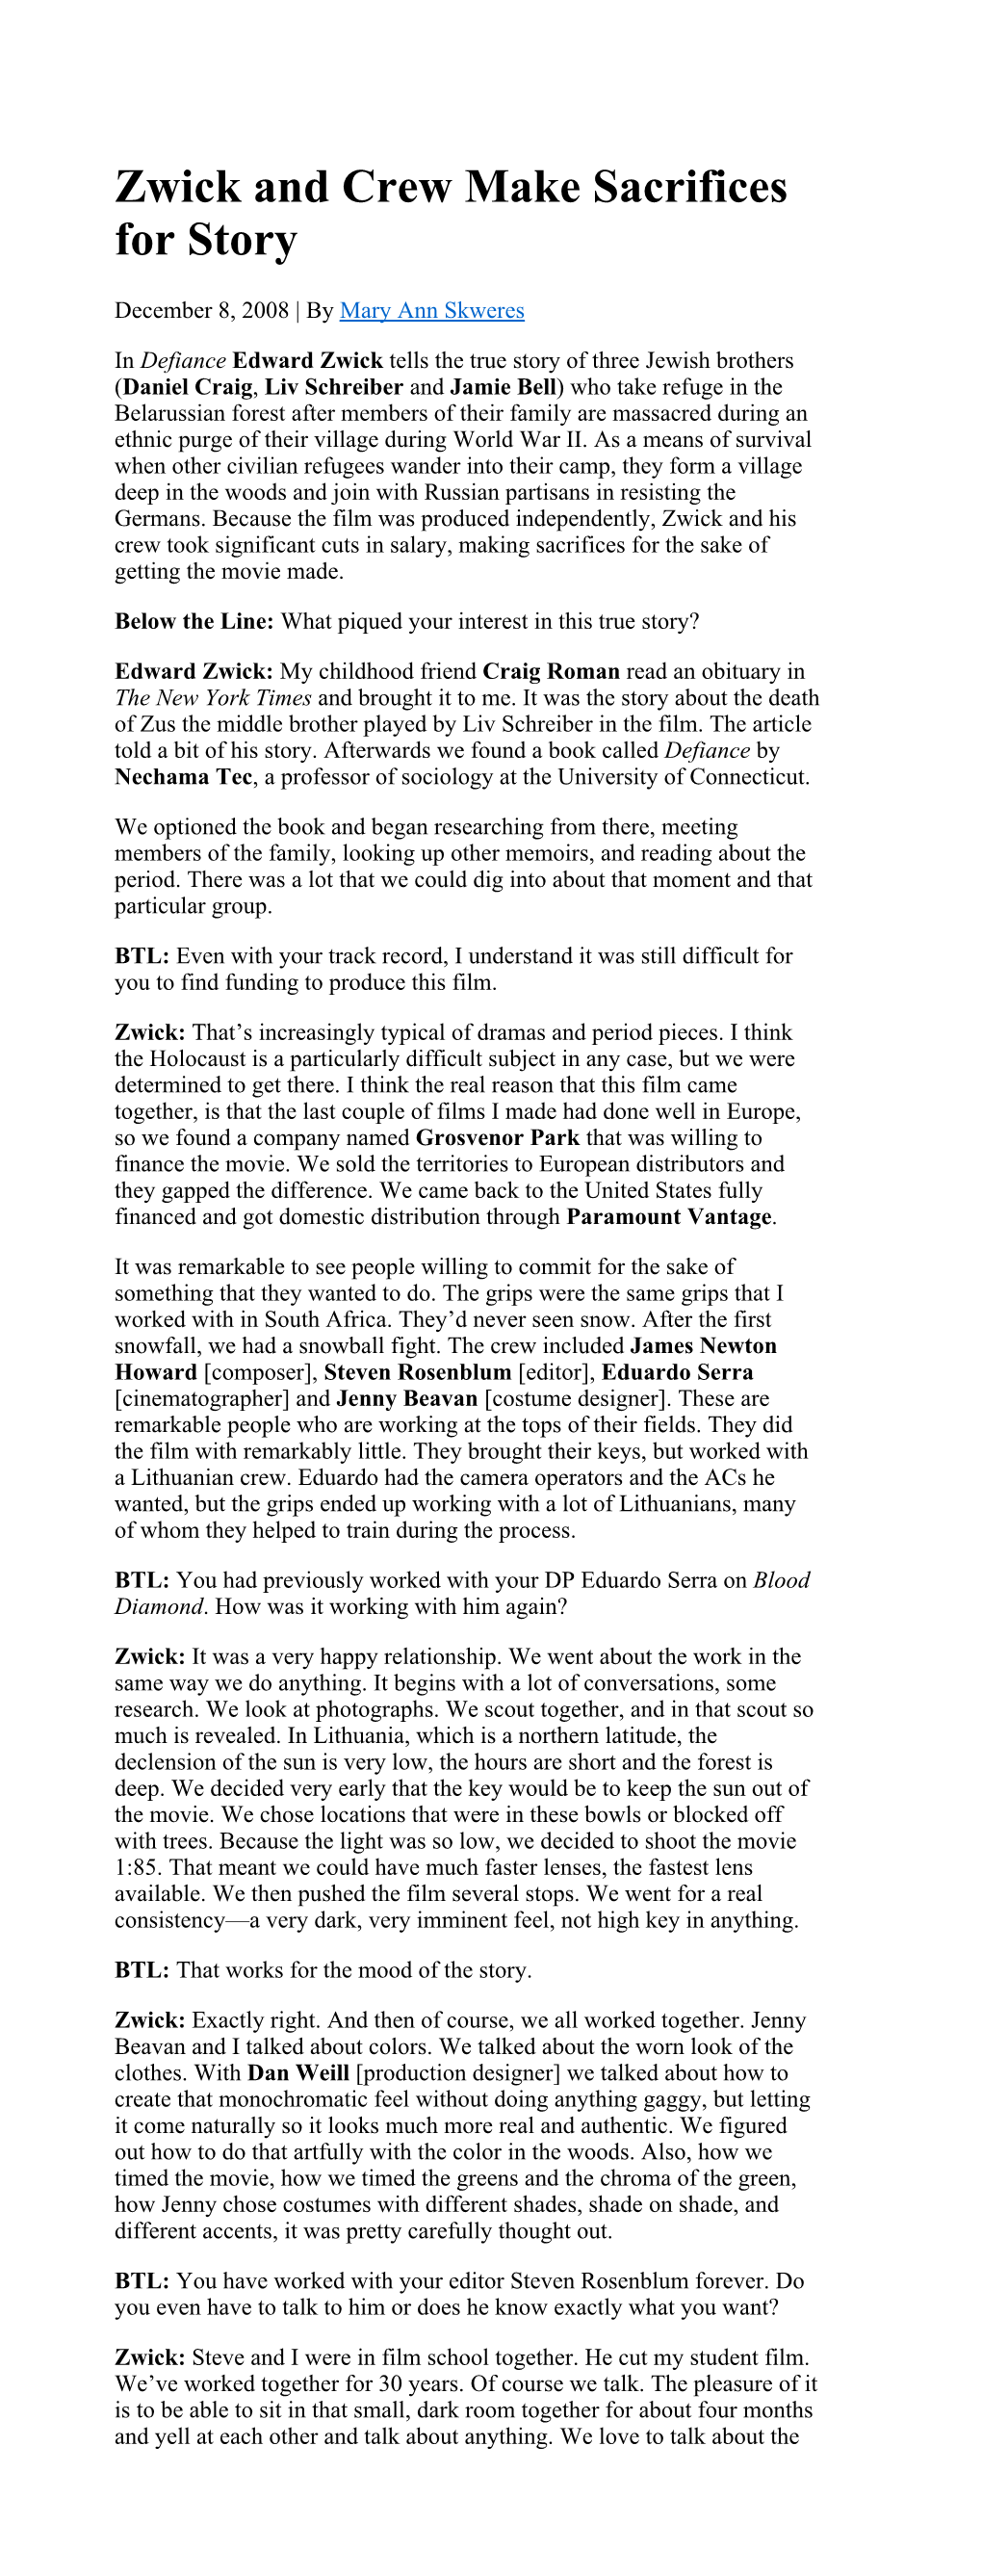 Zwick and Crew Make Sacrifices for Story | Below the Line Page 1 of 2